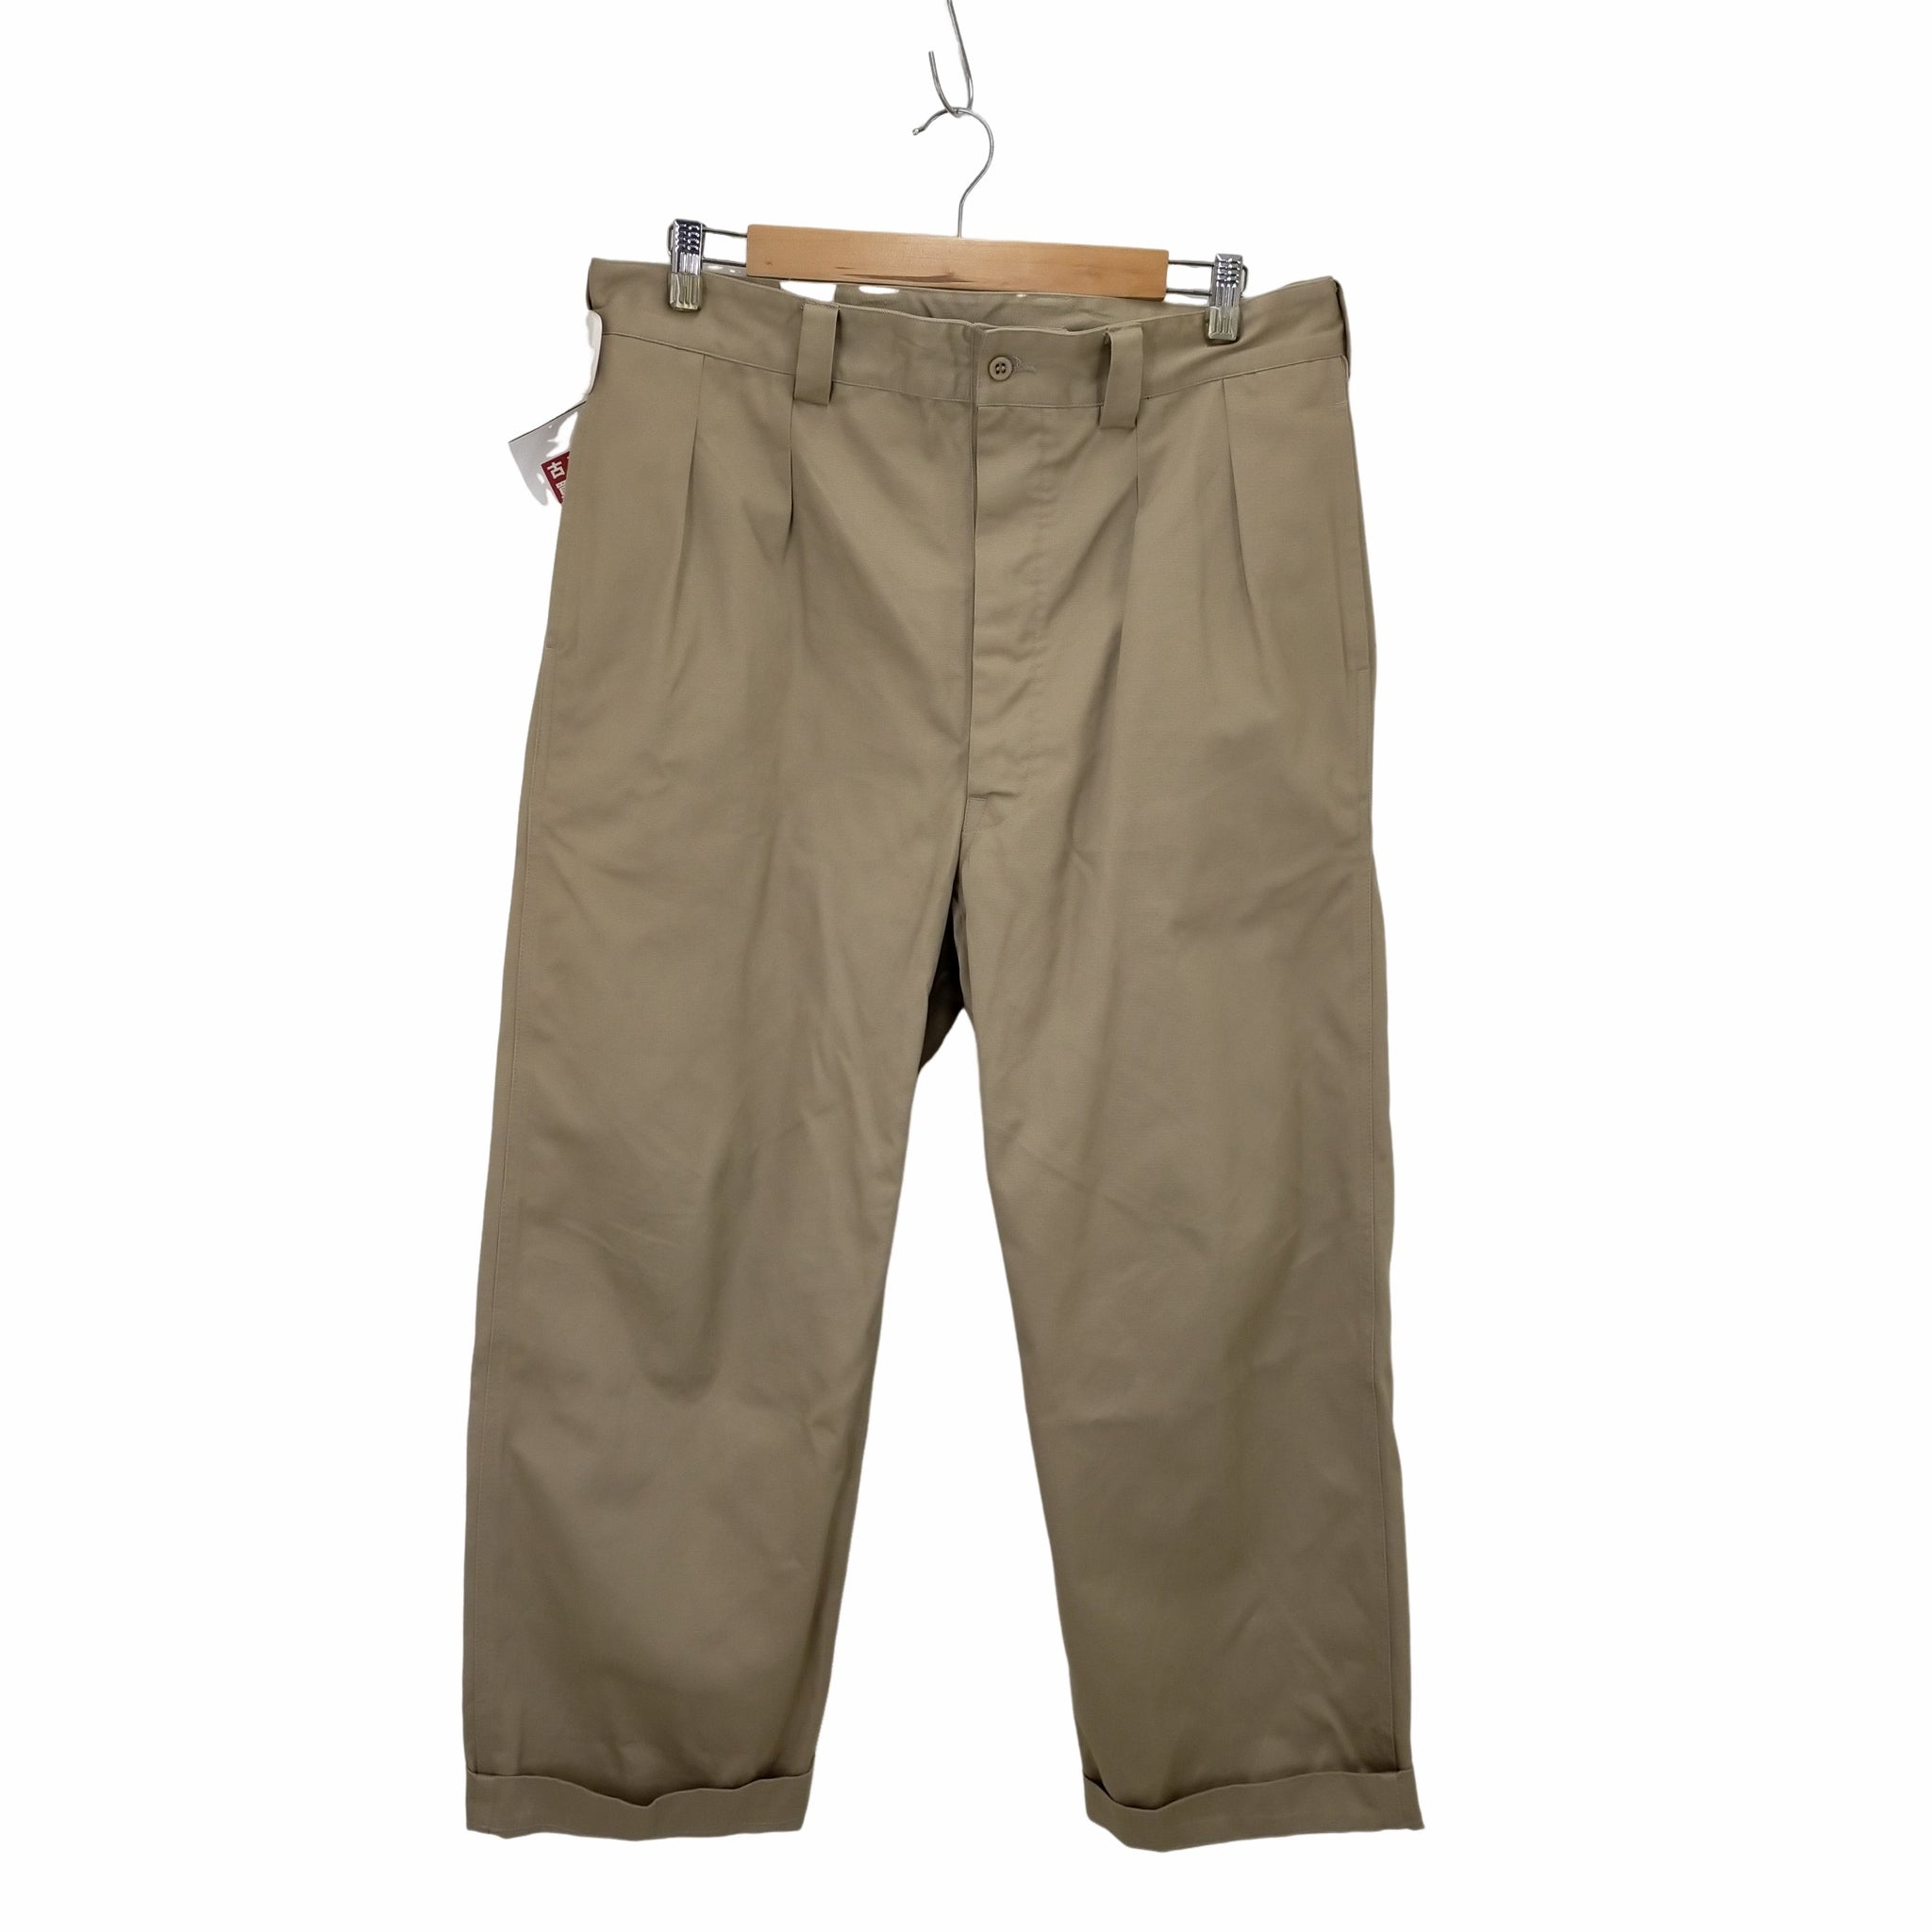 WAIPER.inc(ワイパーインク)FRENCH ARMY M-52 WESTPOINT TAPERED CHINO TROUSERS - TWO TUCK MODEL